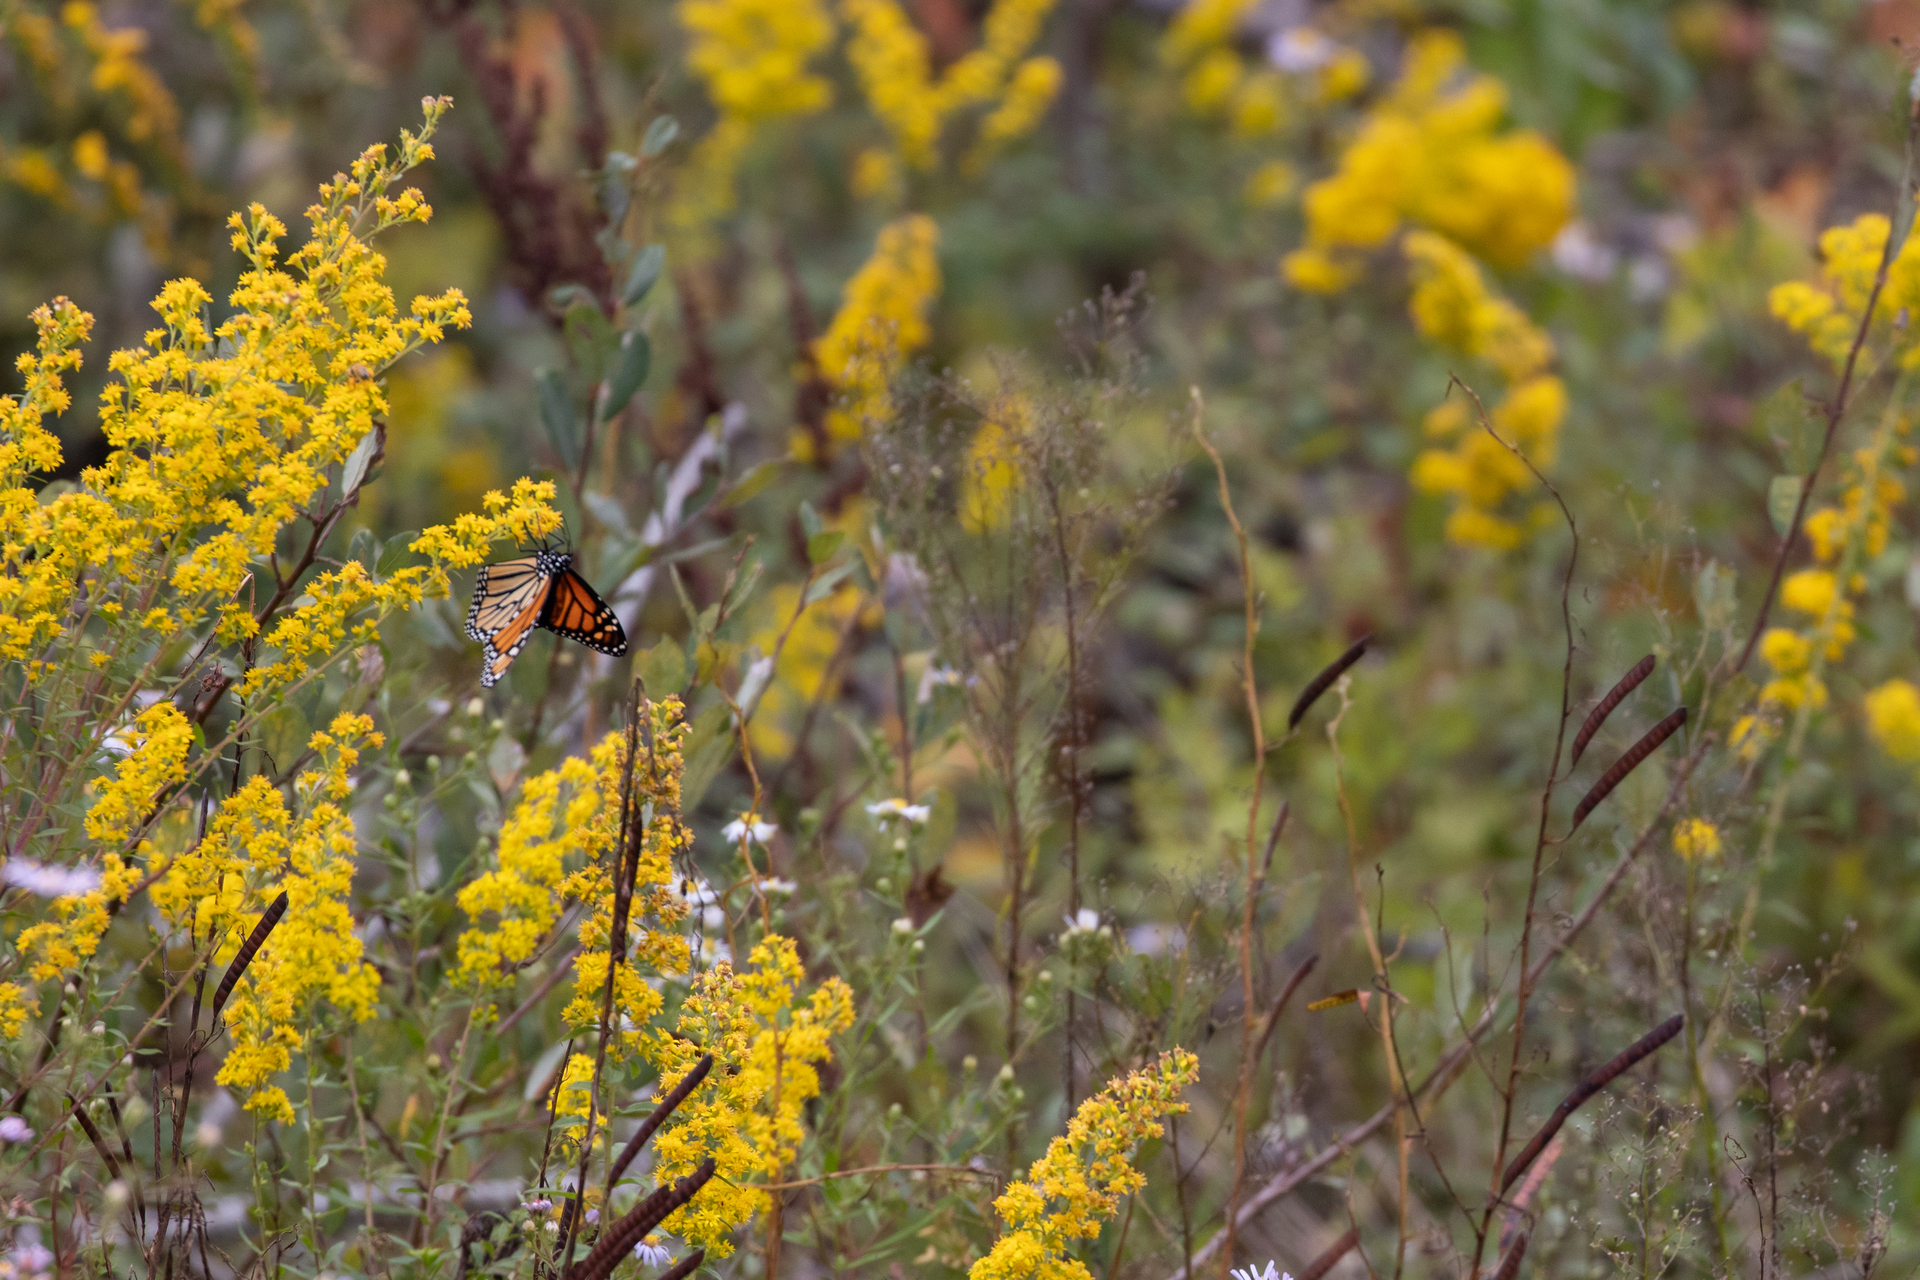 A Monarch Butterfly hangs on to a yellow flower. Other yellow flowers are scattered throughout the frame.